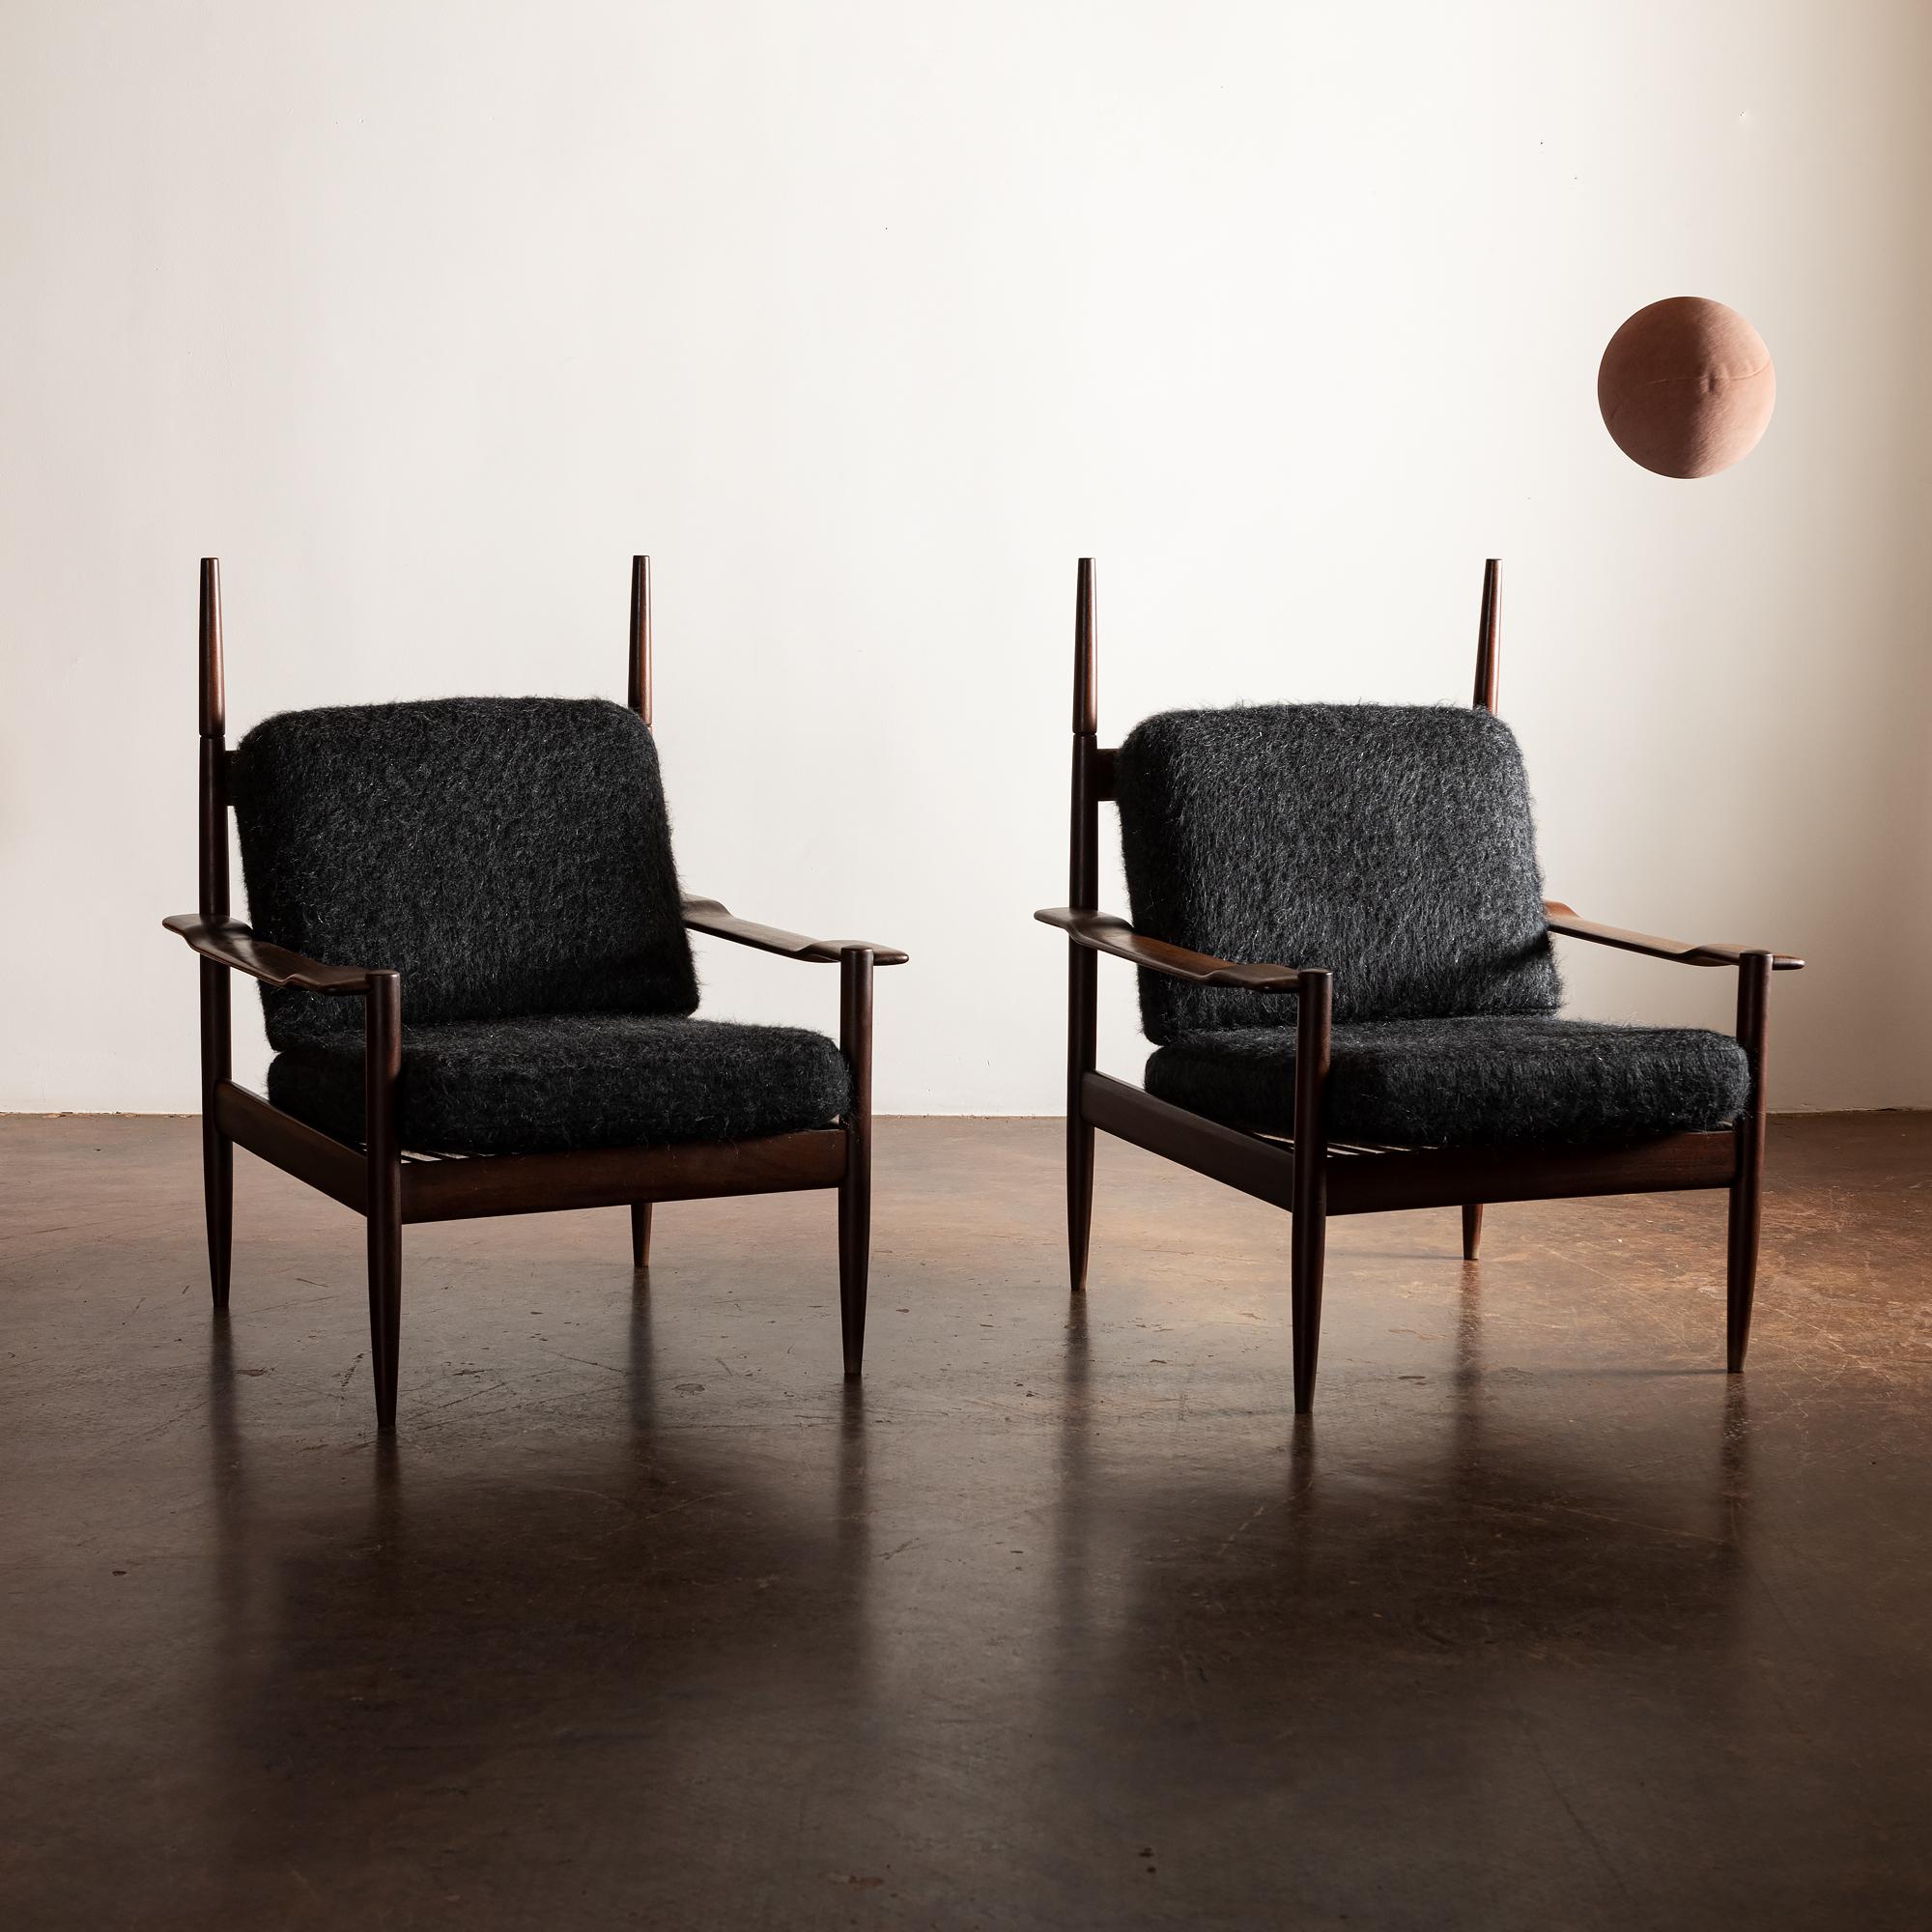 A sculptural pair of teak chairs with shaped arms and extended finials on the back. Stately and dramatic. Recently reupholstered in Pierre Frey Yeti Bagheera. Brazil, 1960s.